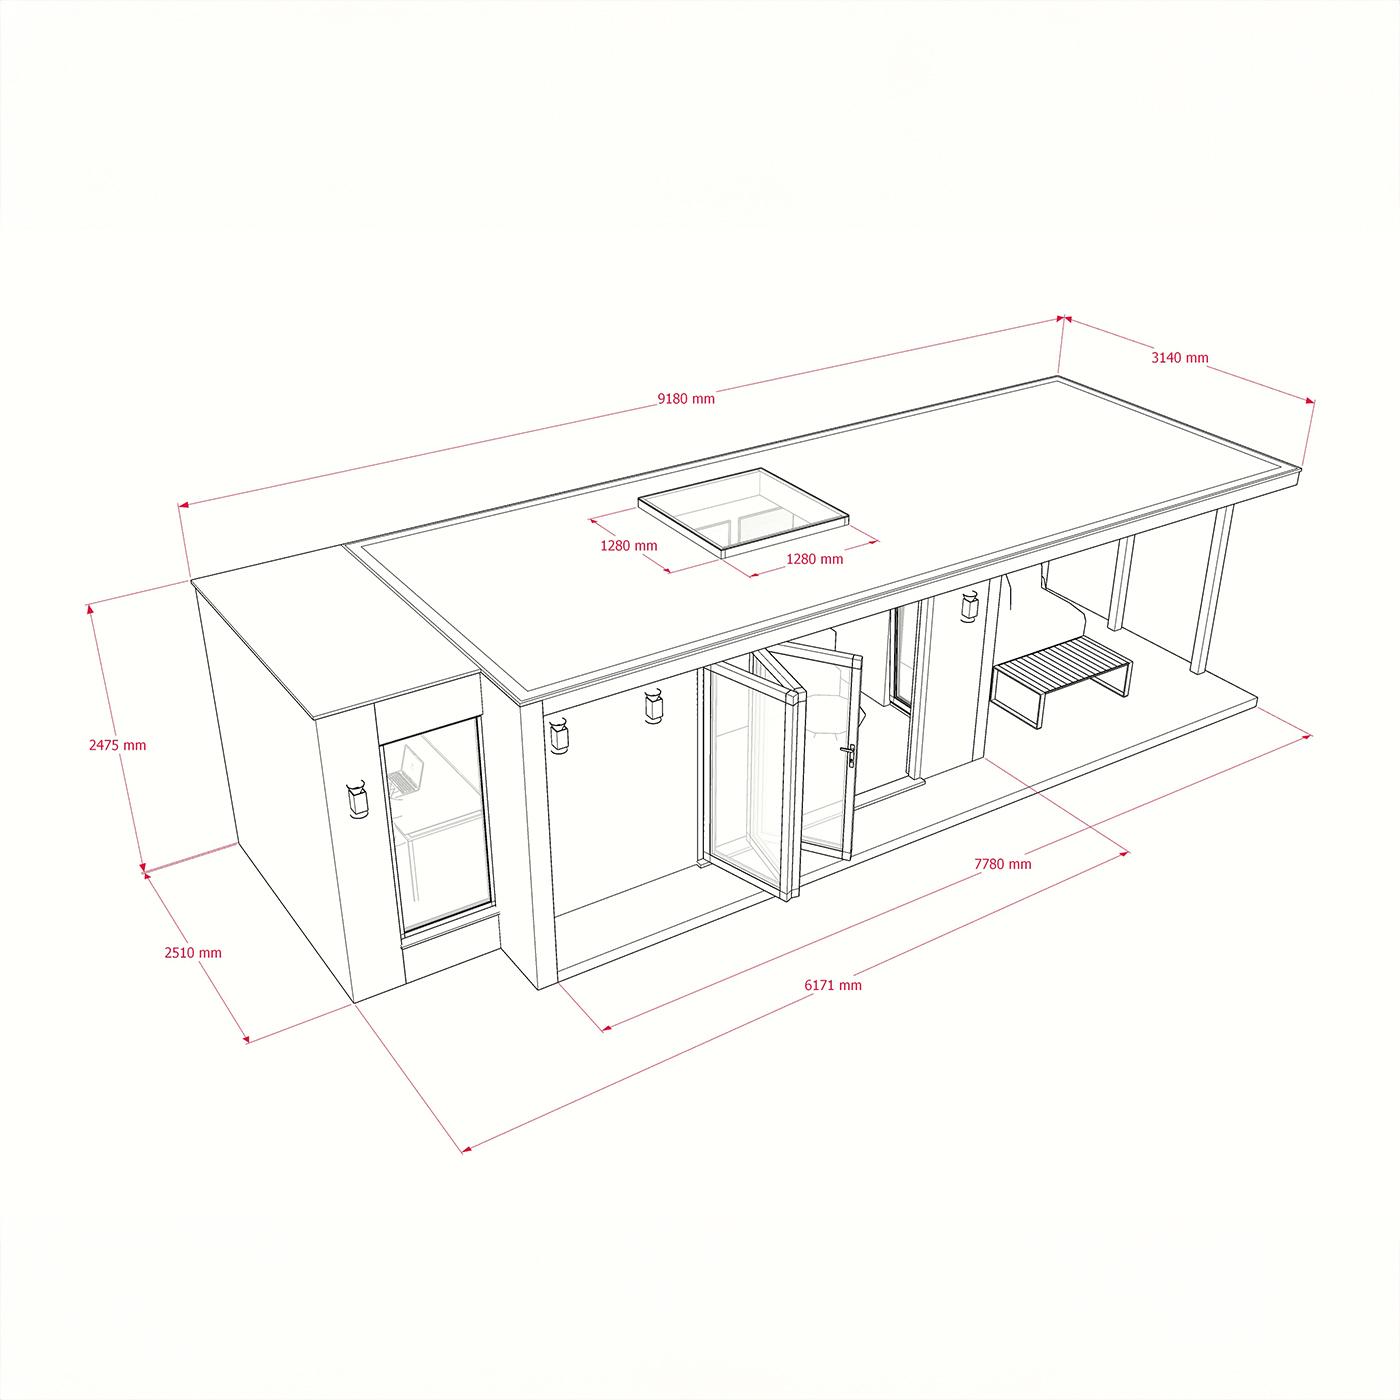 Exterior dimensions for 2.6m by 6.2m garden office